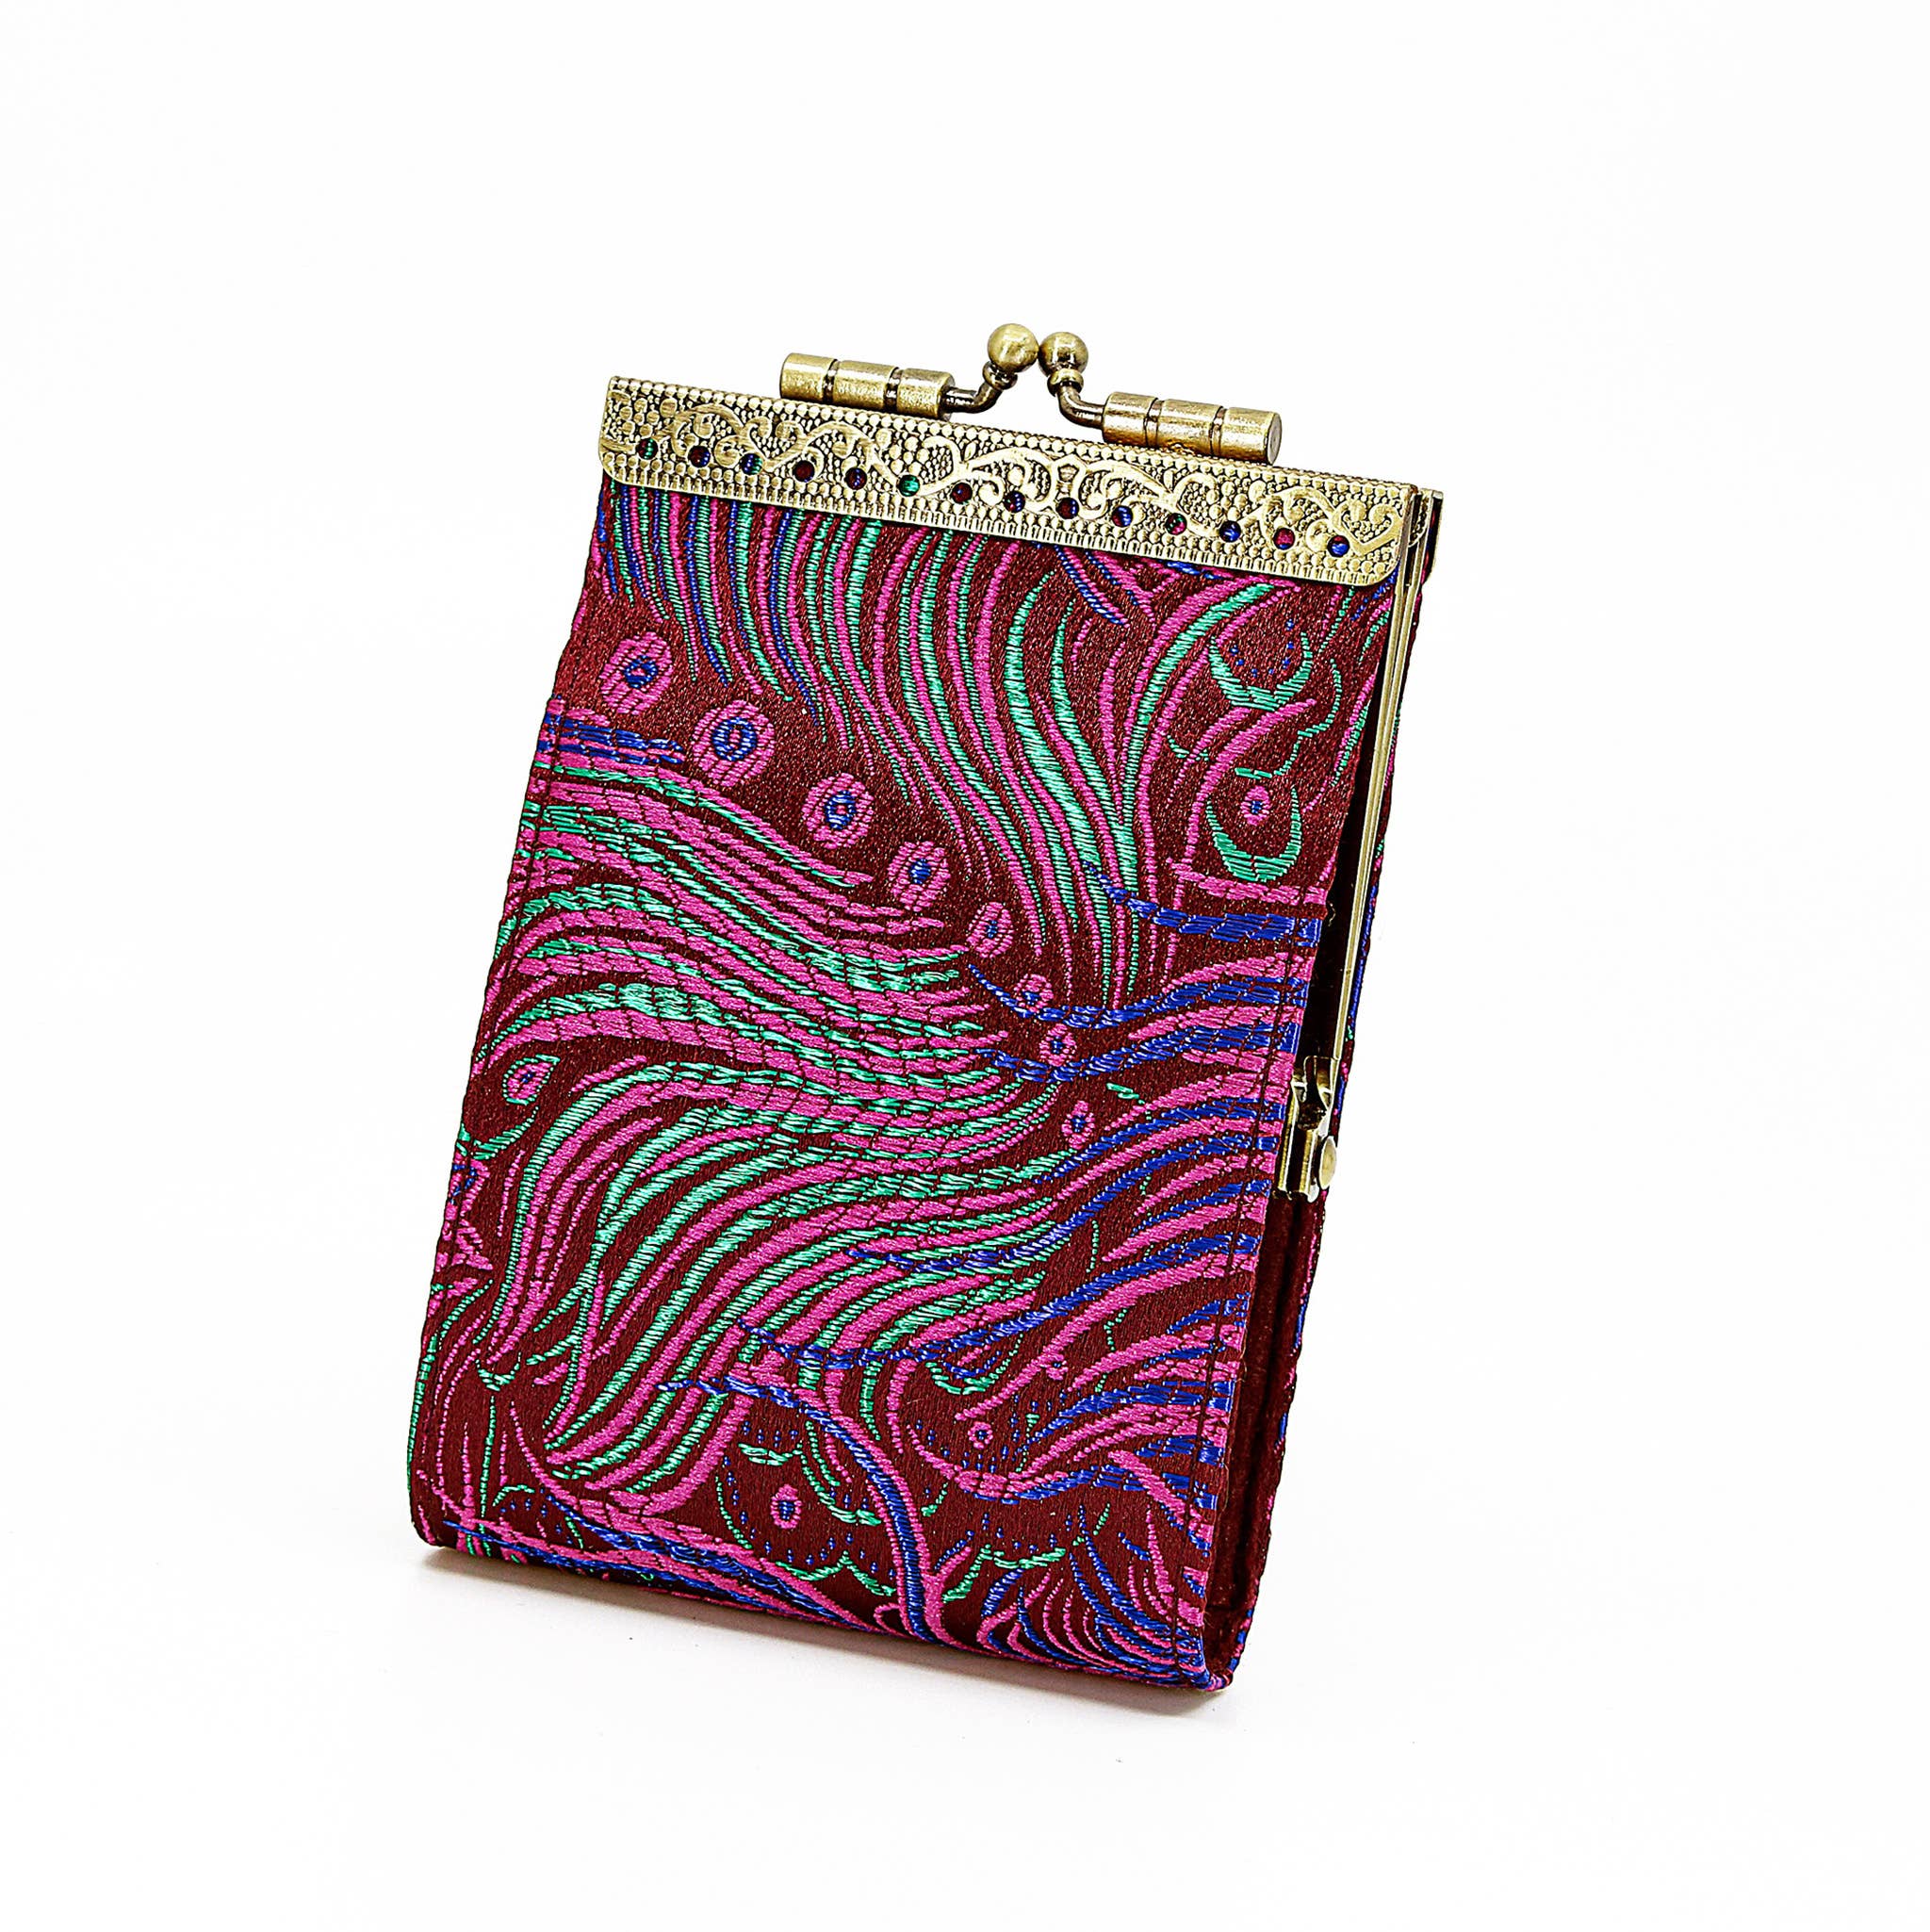 Brocade Peacock Card Holder w/ RFID, Card Case, Card Wallet: Purple & Fuchsia - Out of the Blue